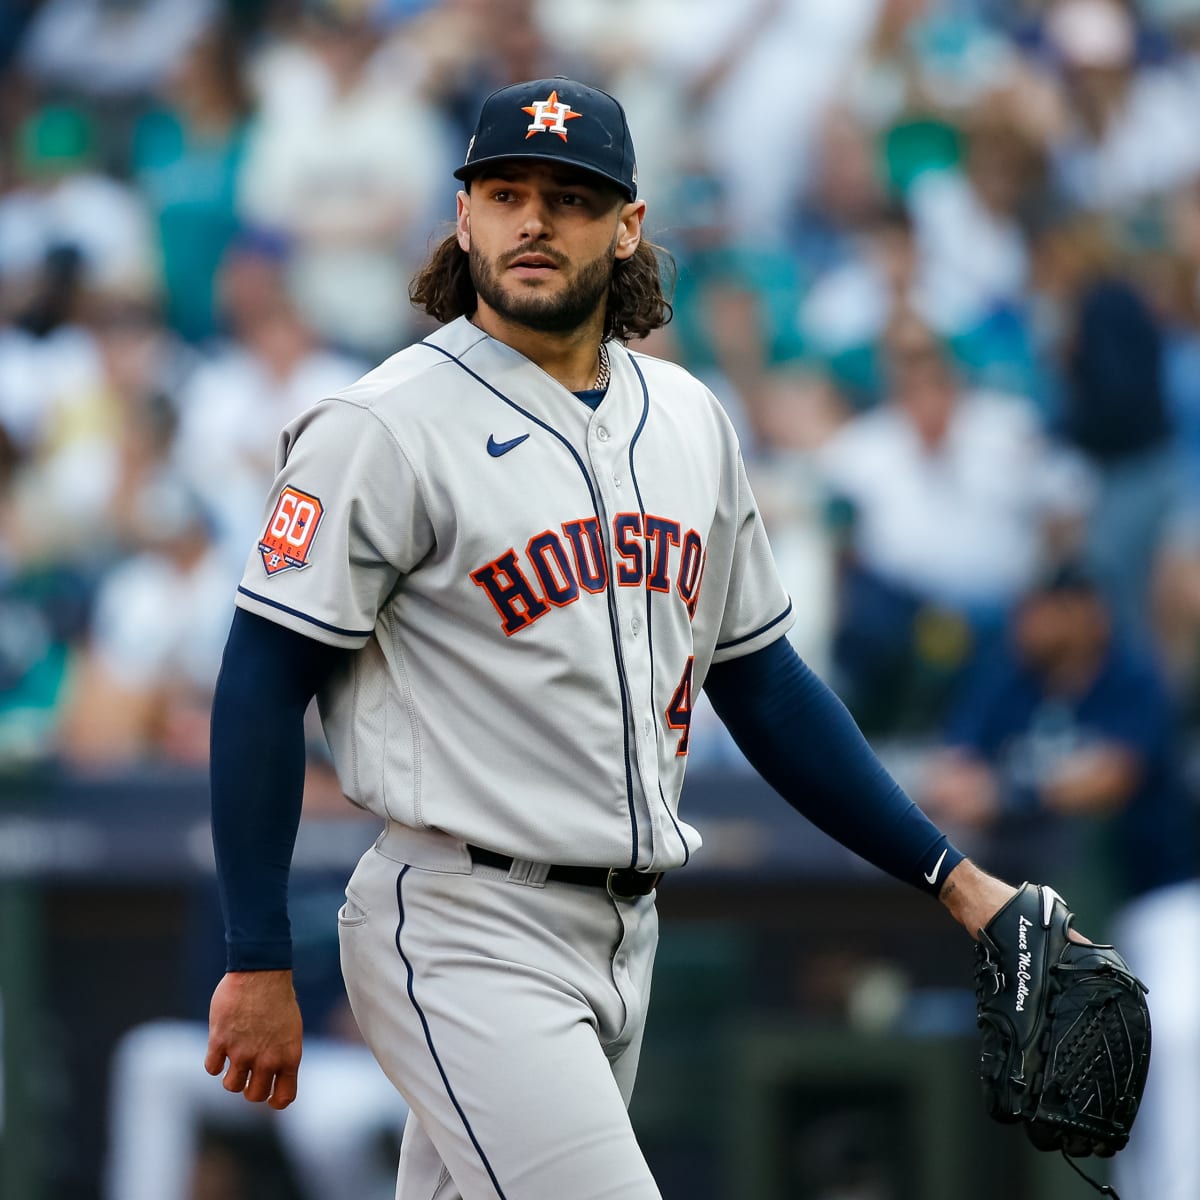 Astros Lose McCullers to Injury for ALCS